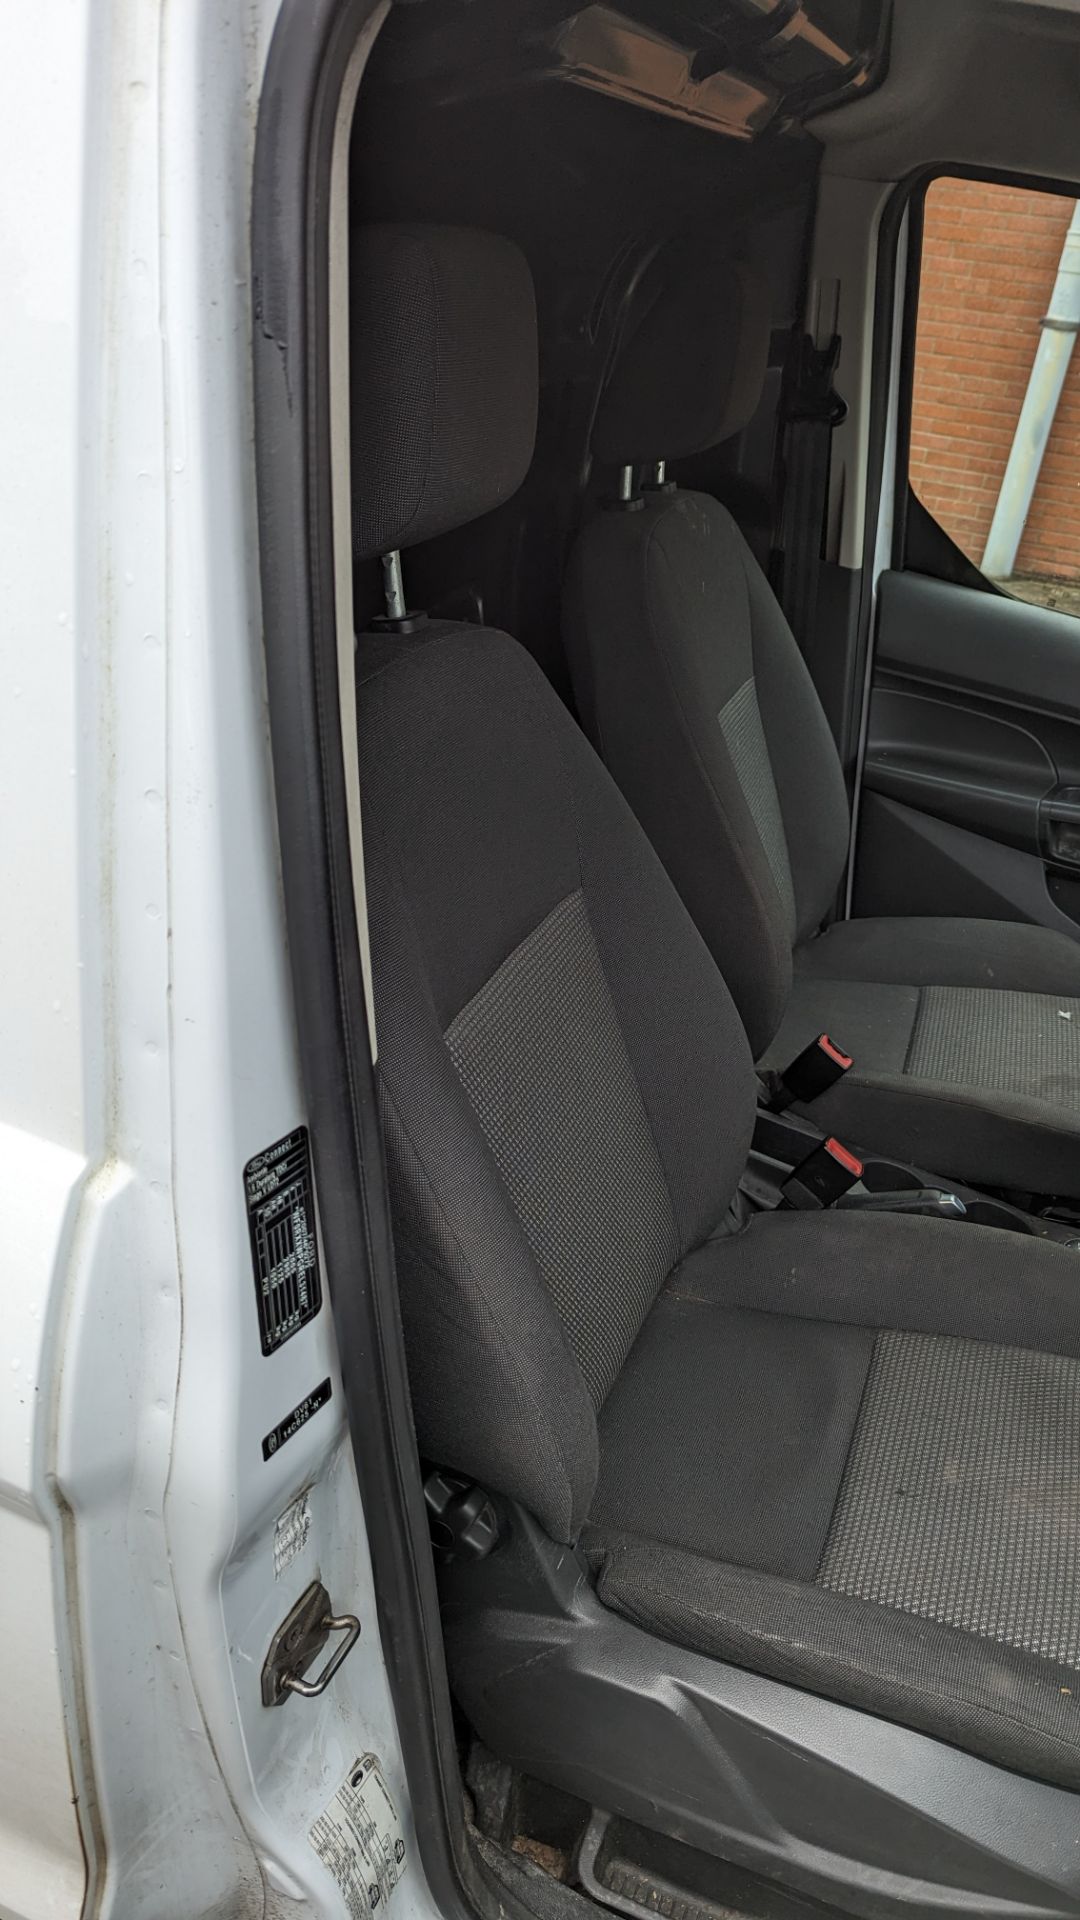 2014 Ford Transit Connect 200 panel van - Image 19 of 20